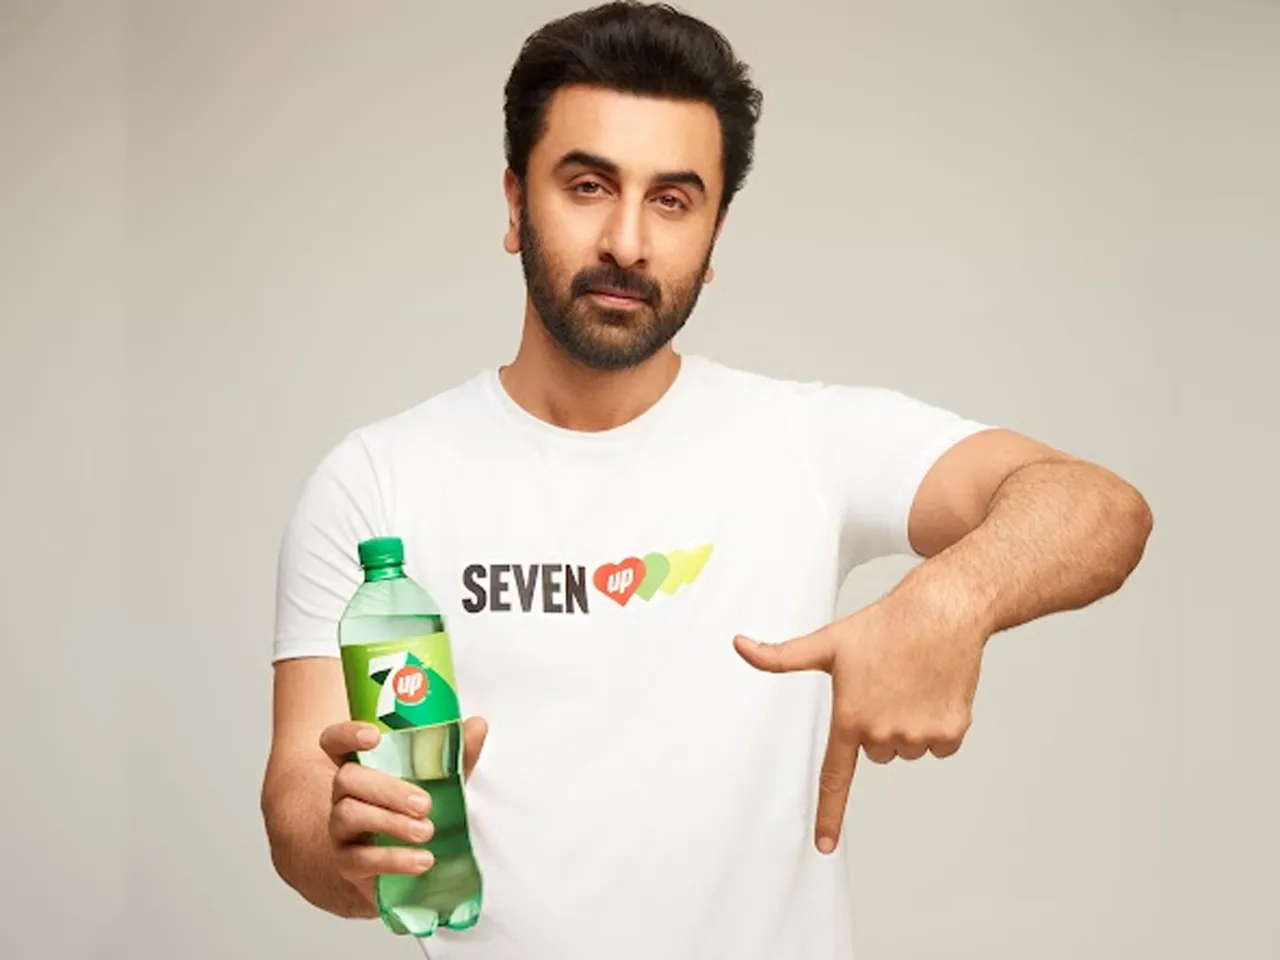 7up onboards Ranbir Kapoor as the brand ambassador in India